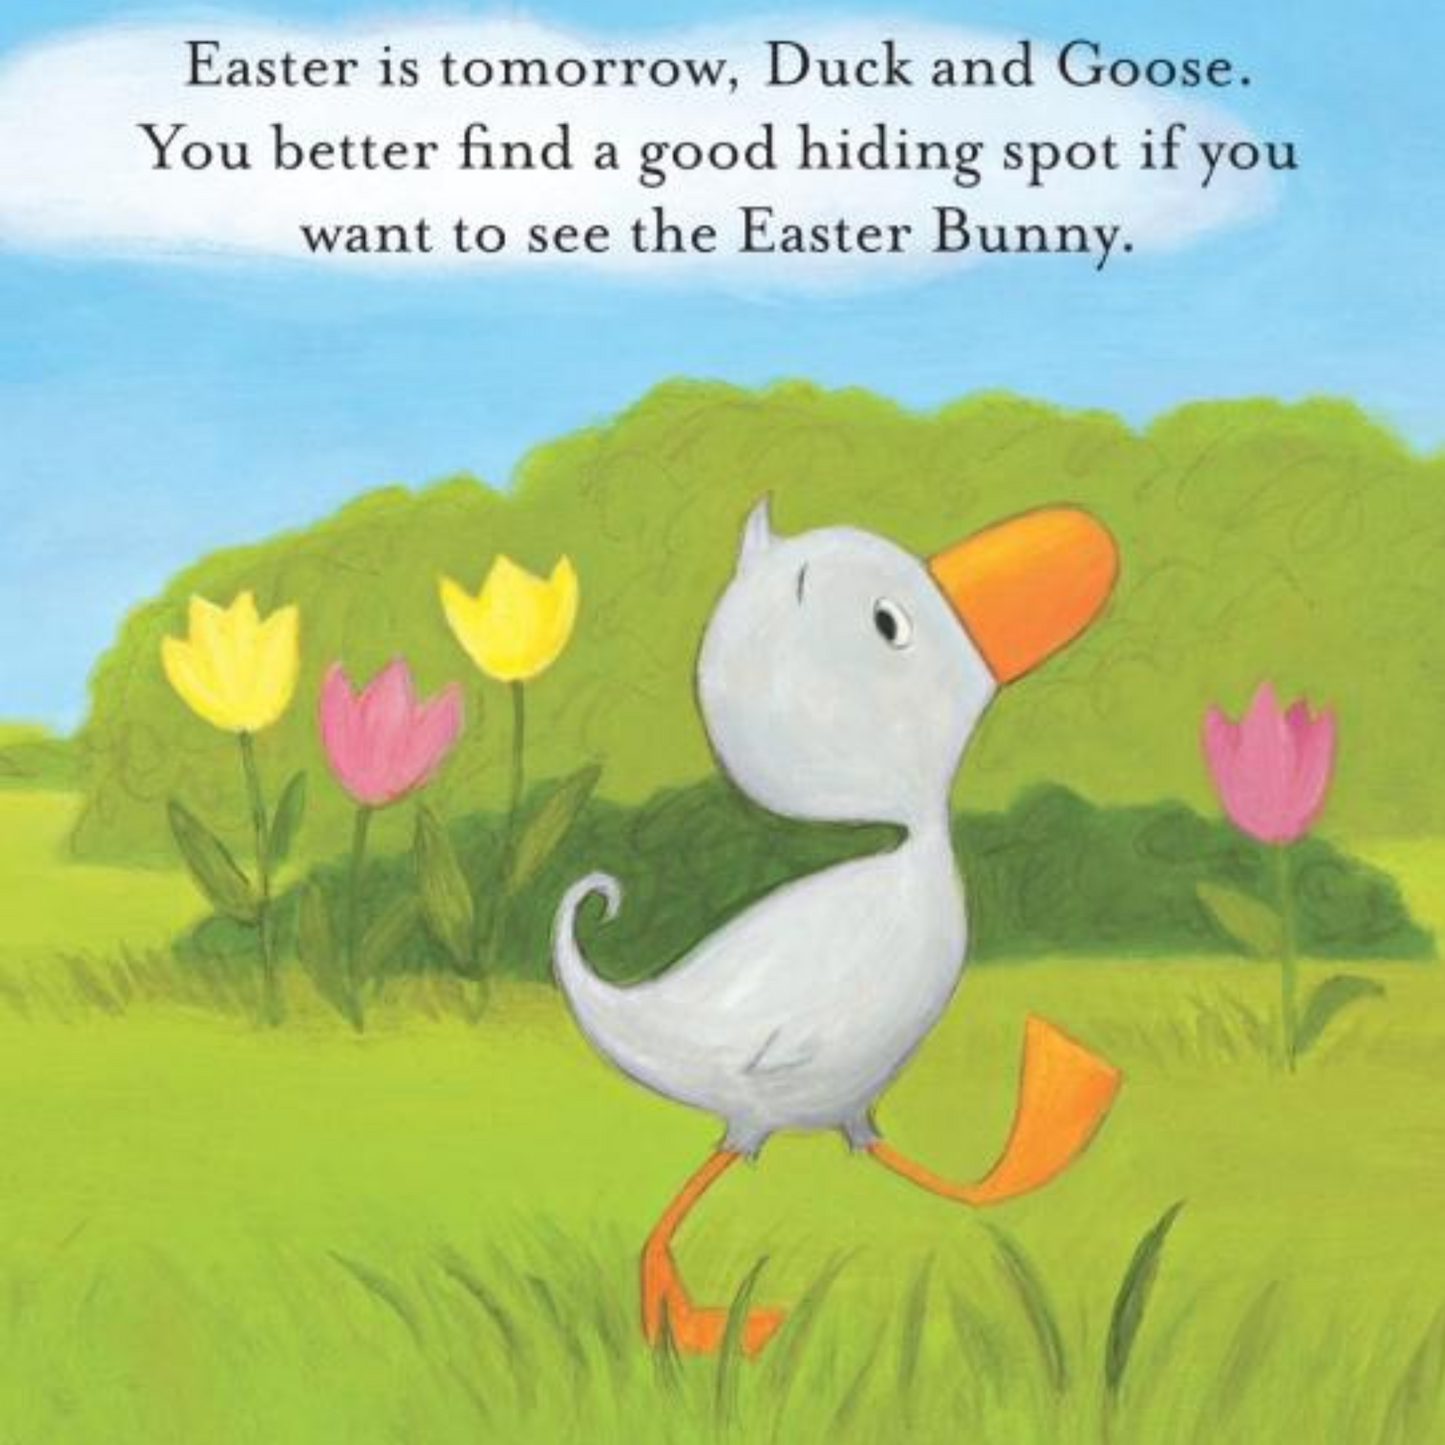 Duck and Goose Here Comes The Easter Bunny Board Book - Interest ages 1-5 Years